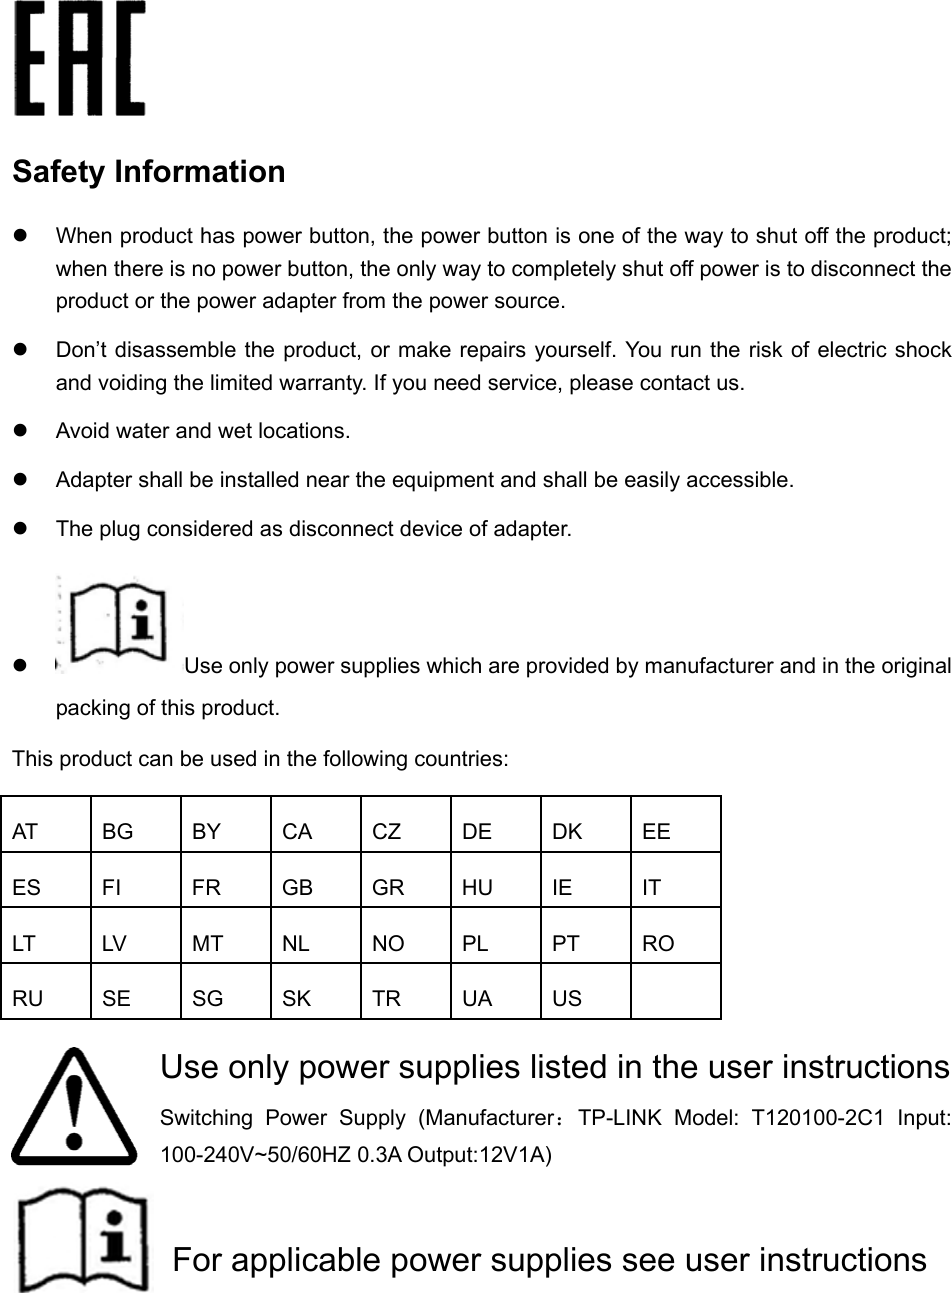    Safety Information  When product has power button, the power button is one of the way to shut off the product; when there is no power button, the only way to completely shut off power is to disconnect the product or the power adapter from the power source.  Don’t disassemble the product, or make repairs yourself. You run the risk of electric shock and voiding the limited warranty. If you need service, please contact us.  Avoid water and wet locations.  Adapter shall be installed near the equipment and shall be easily accessible.  The plug considered as disconnect device of adapter.  Use only power supplies which are provided by manufacturer and in the original packing of this product.     This product can be used in the following countries:       Use only power supplies listed in the user instructions Switching Power Supply (Manufacturer：TP-LINK Model: T120100-2C1 Input: 100-240V~50/60HZ 0.3A Output:12V1A)    For applicable power supplies see user instructionsAT BG BY CA CZ DE DK EE ES FI FR GB GR HU IE IT LT LV MT NL NO PL PT RO RU SE SG SK TR UA US   